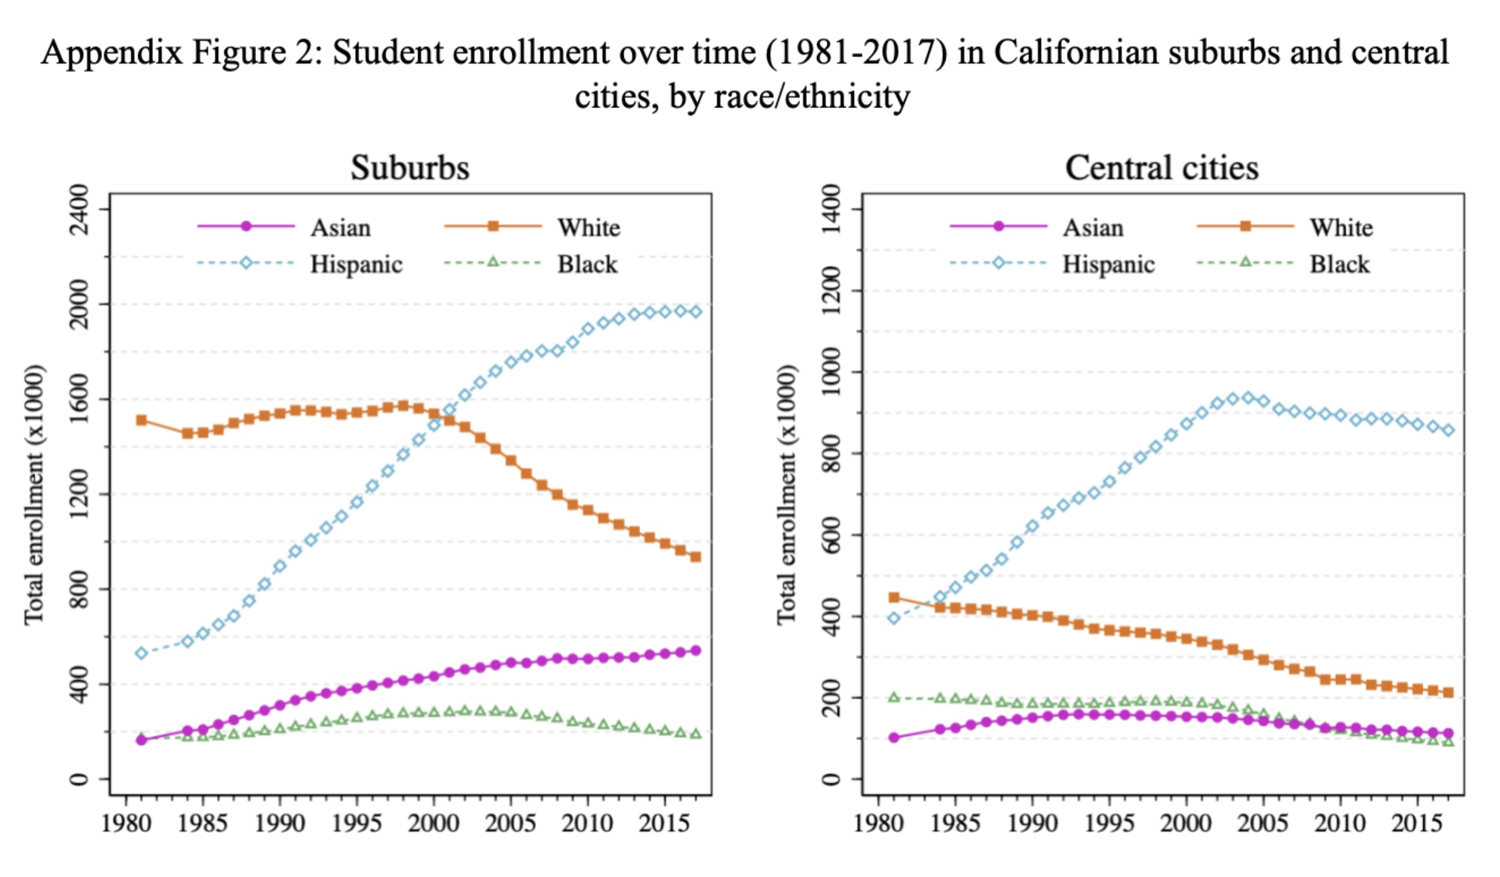 two graphs showing student enrollment in CA suburbs and cities from 1981-2017 by race/ethnicity